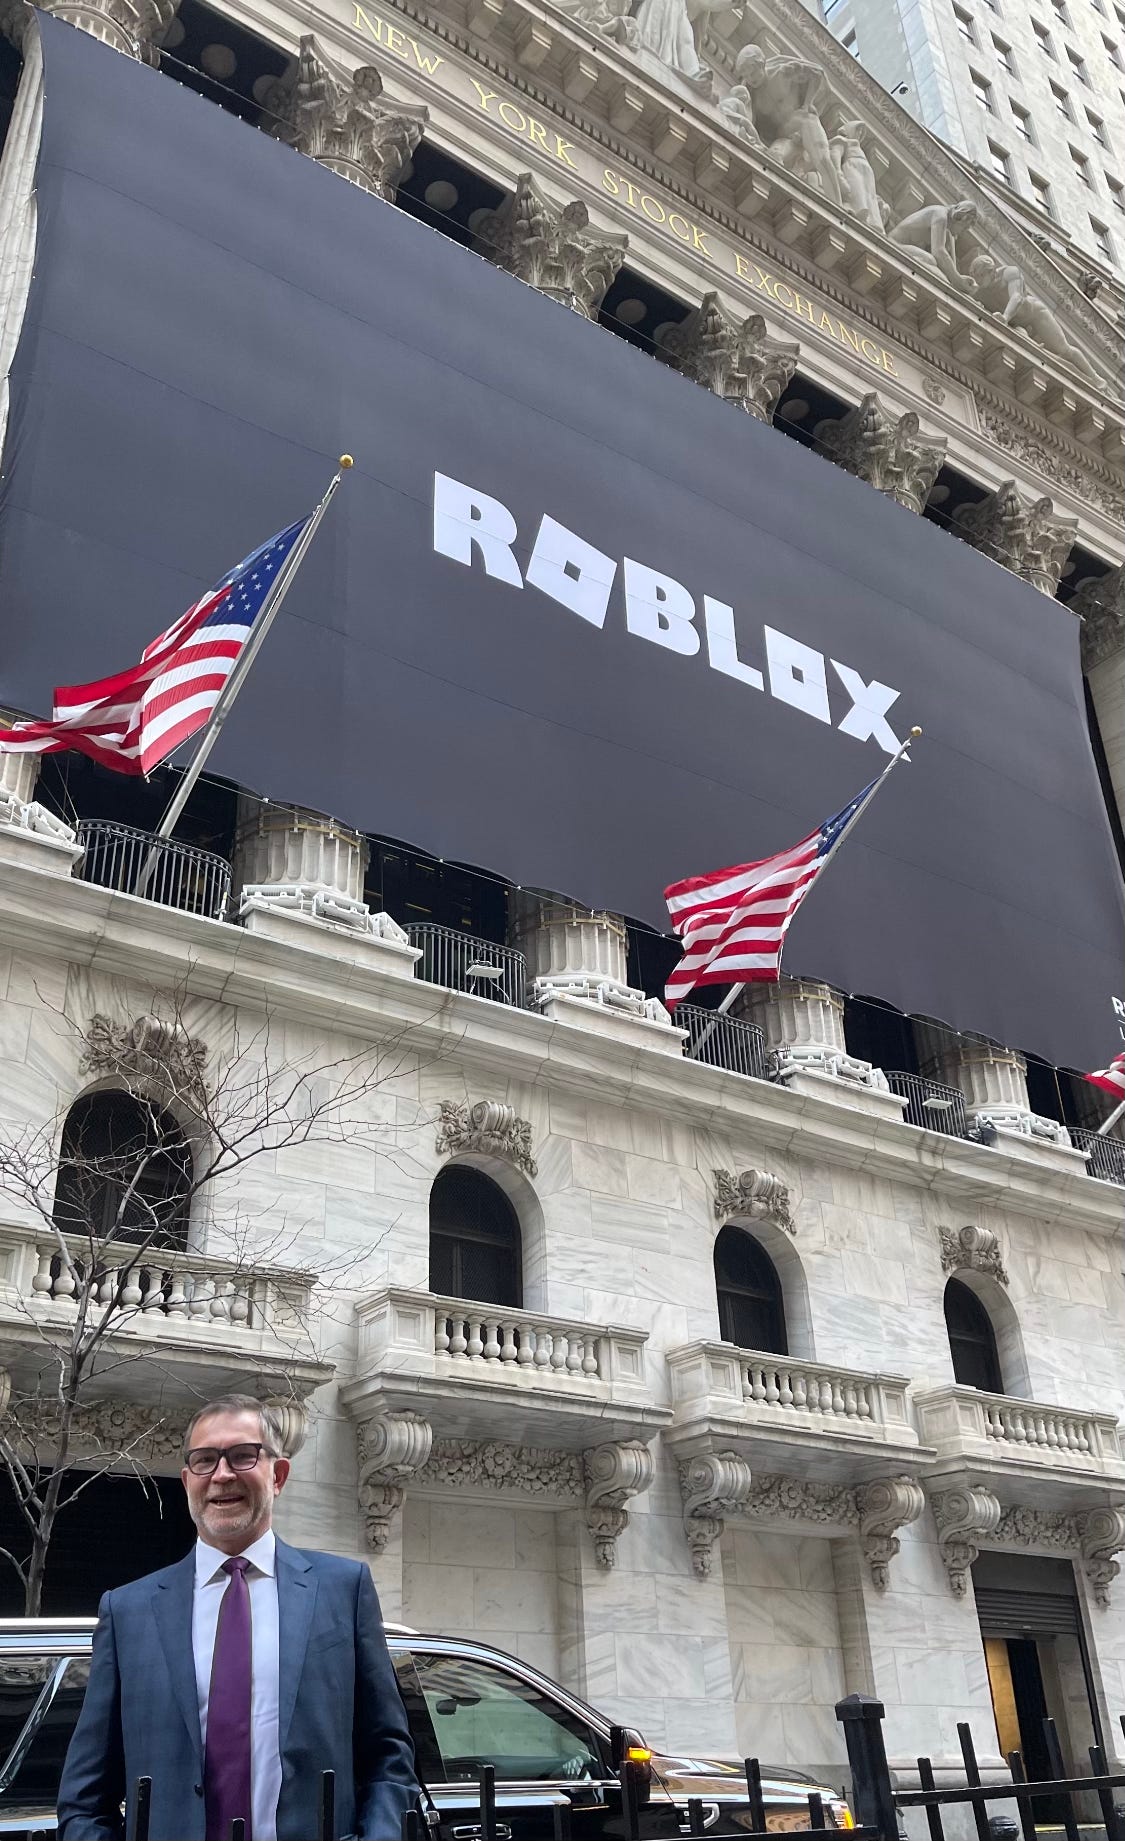 Roblox Isn't In Video Games, It's A Social Gaming Company (NYSE:RBLX)